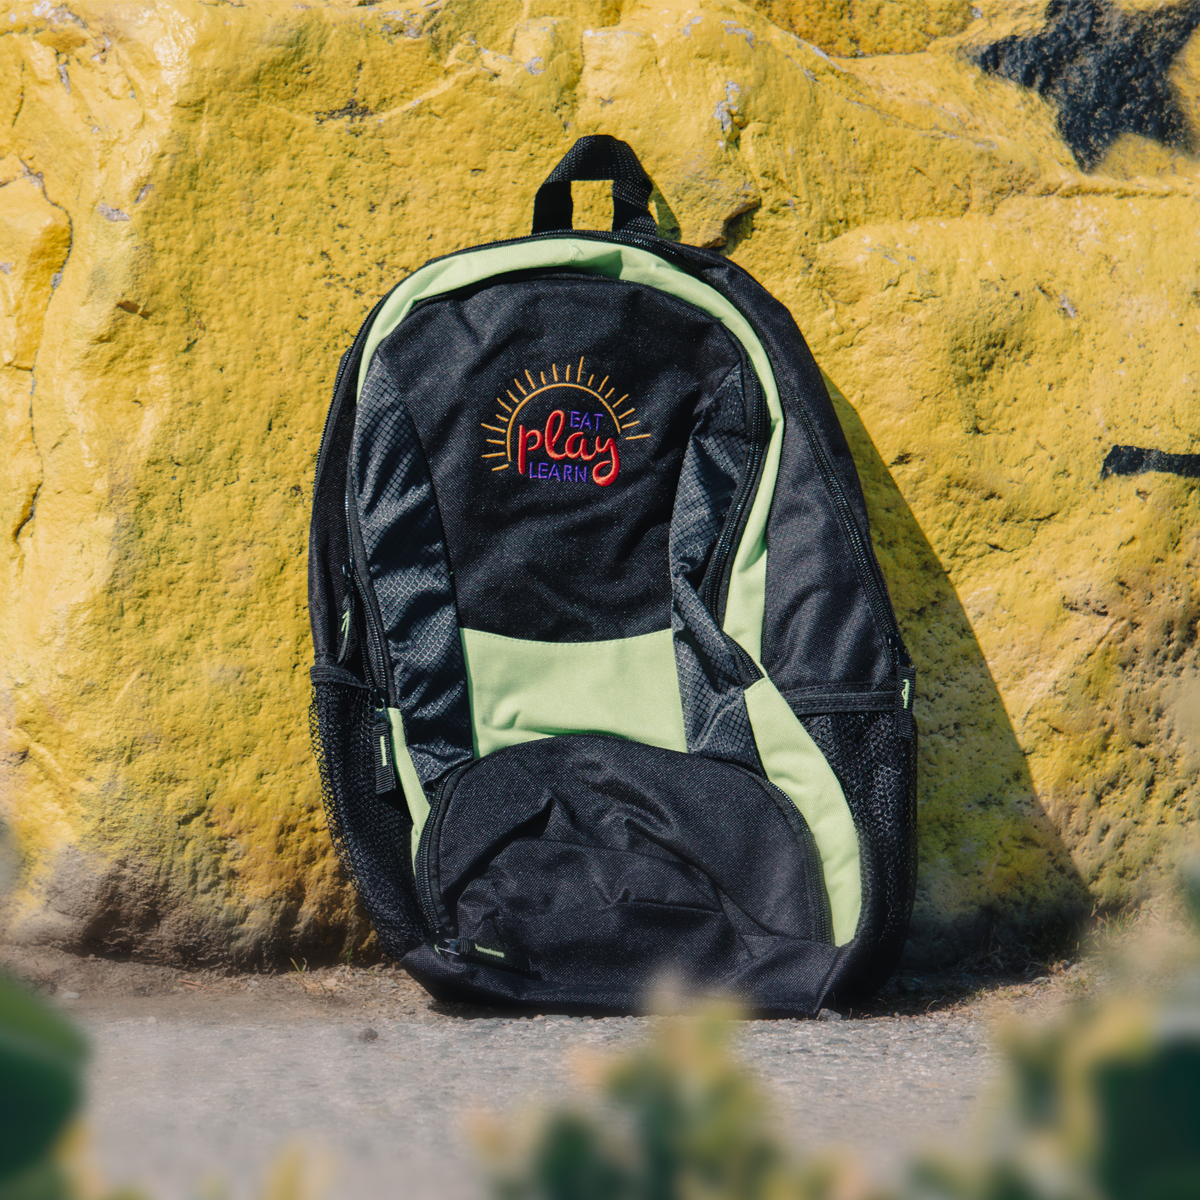 EAT PLAY LEARN PVD 2023 Backpack, Donated by SquadLocker